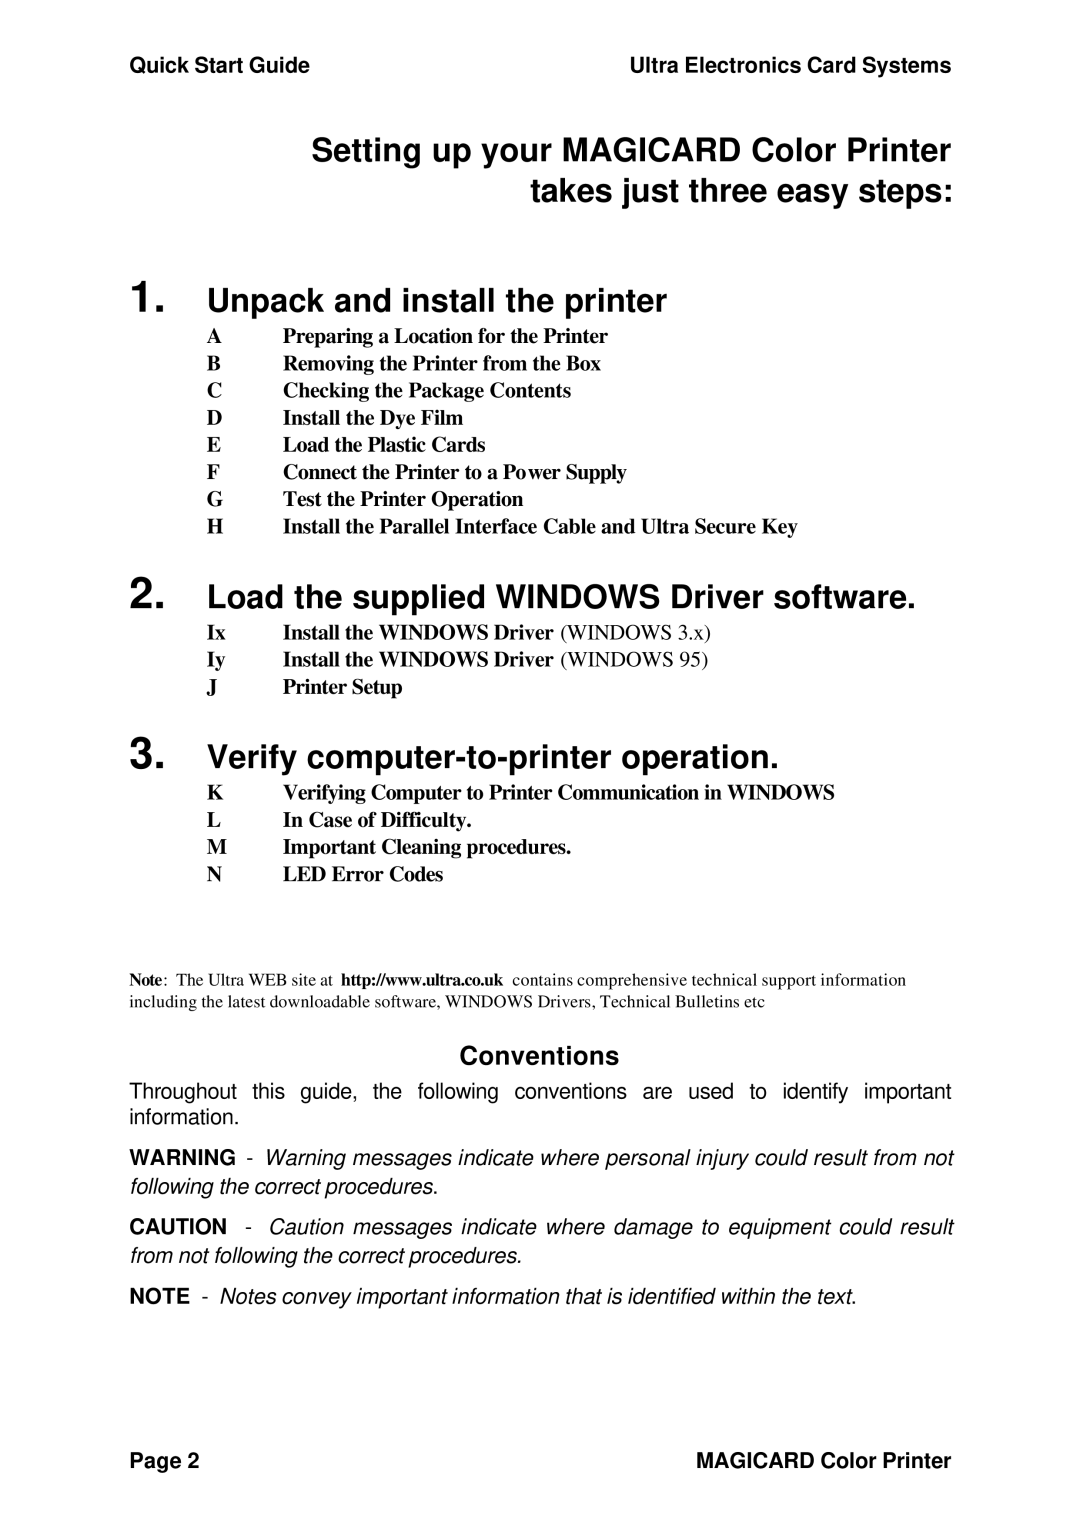 Ultra electronic 300plus Load the supplied Windows Driver software, Verify computer-to-printer operation, Conventions 